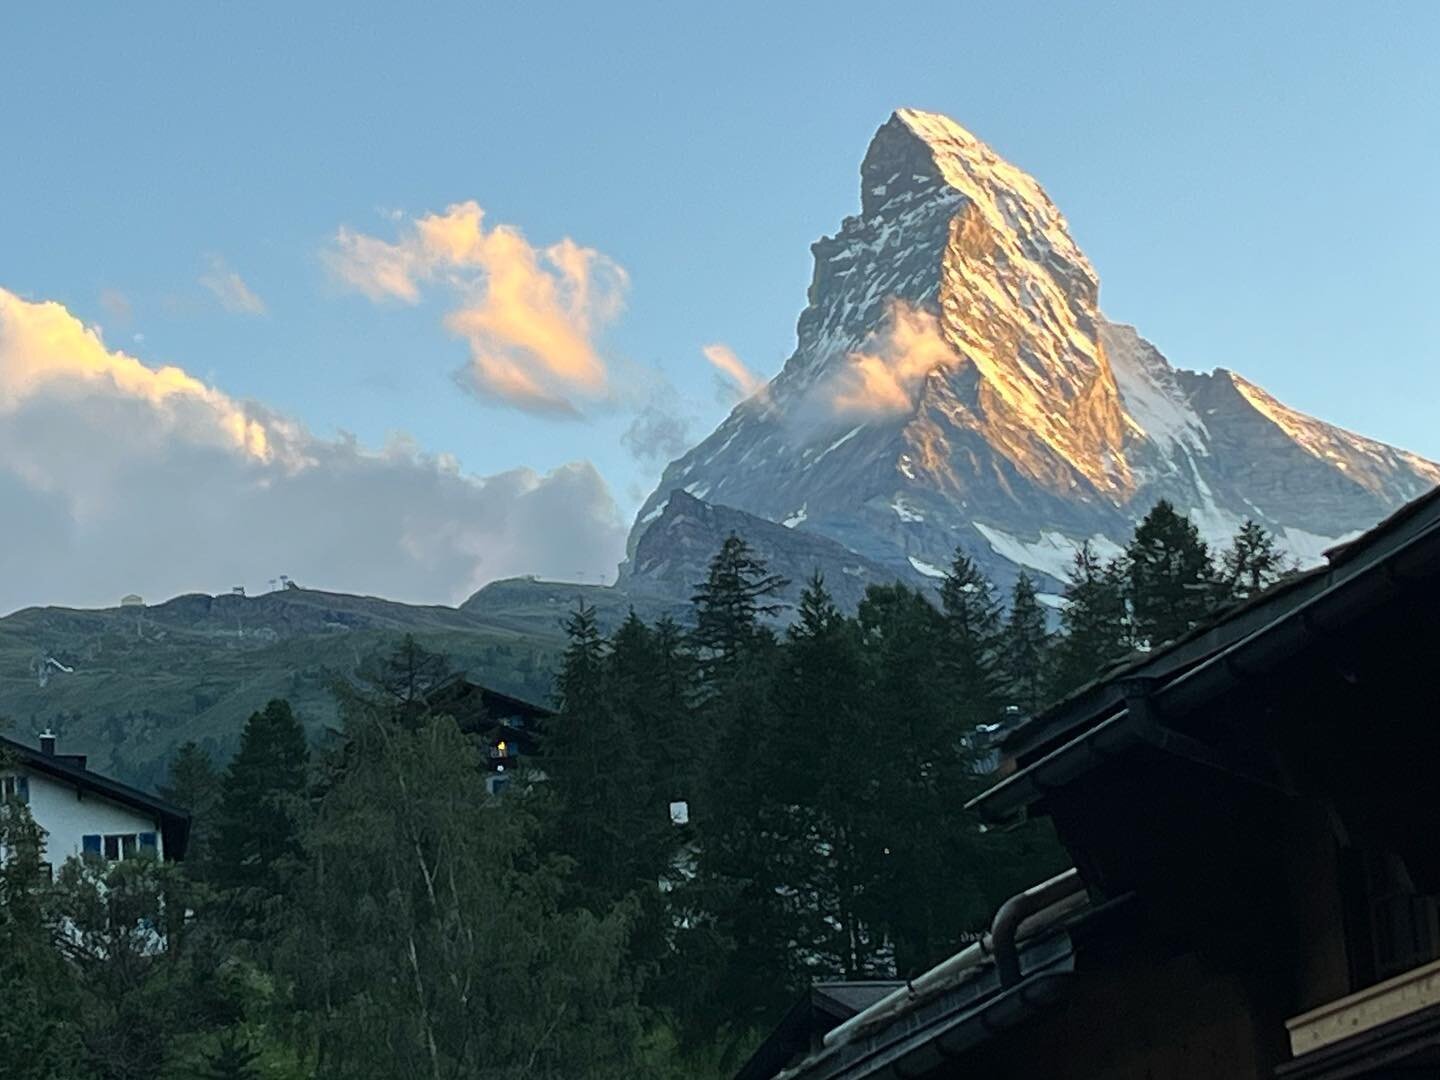 That&rsquo;s it&hellip; the Matterhorn! Shot this from the little bridge outside our flat in Zermatt.  Spent the day up in the mountains wishing the clouds would part to no avail.  Then got back to our place in the valley and watched it come unveiled